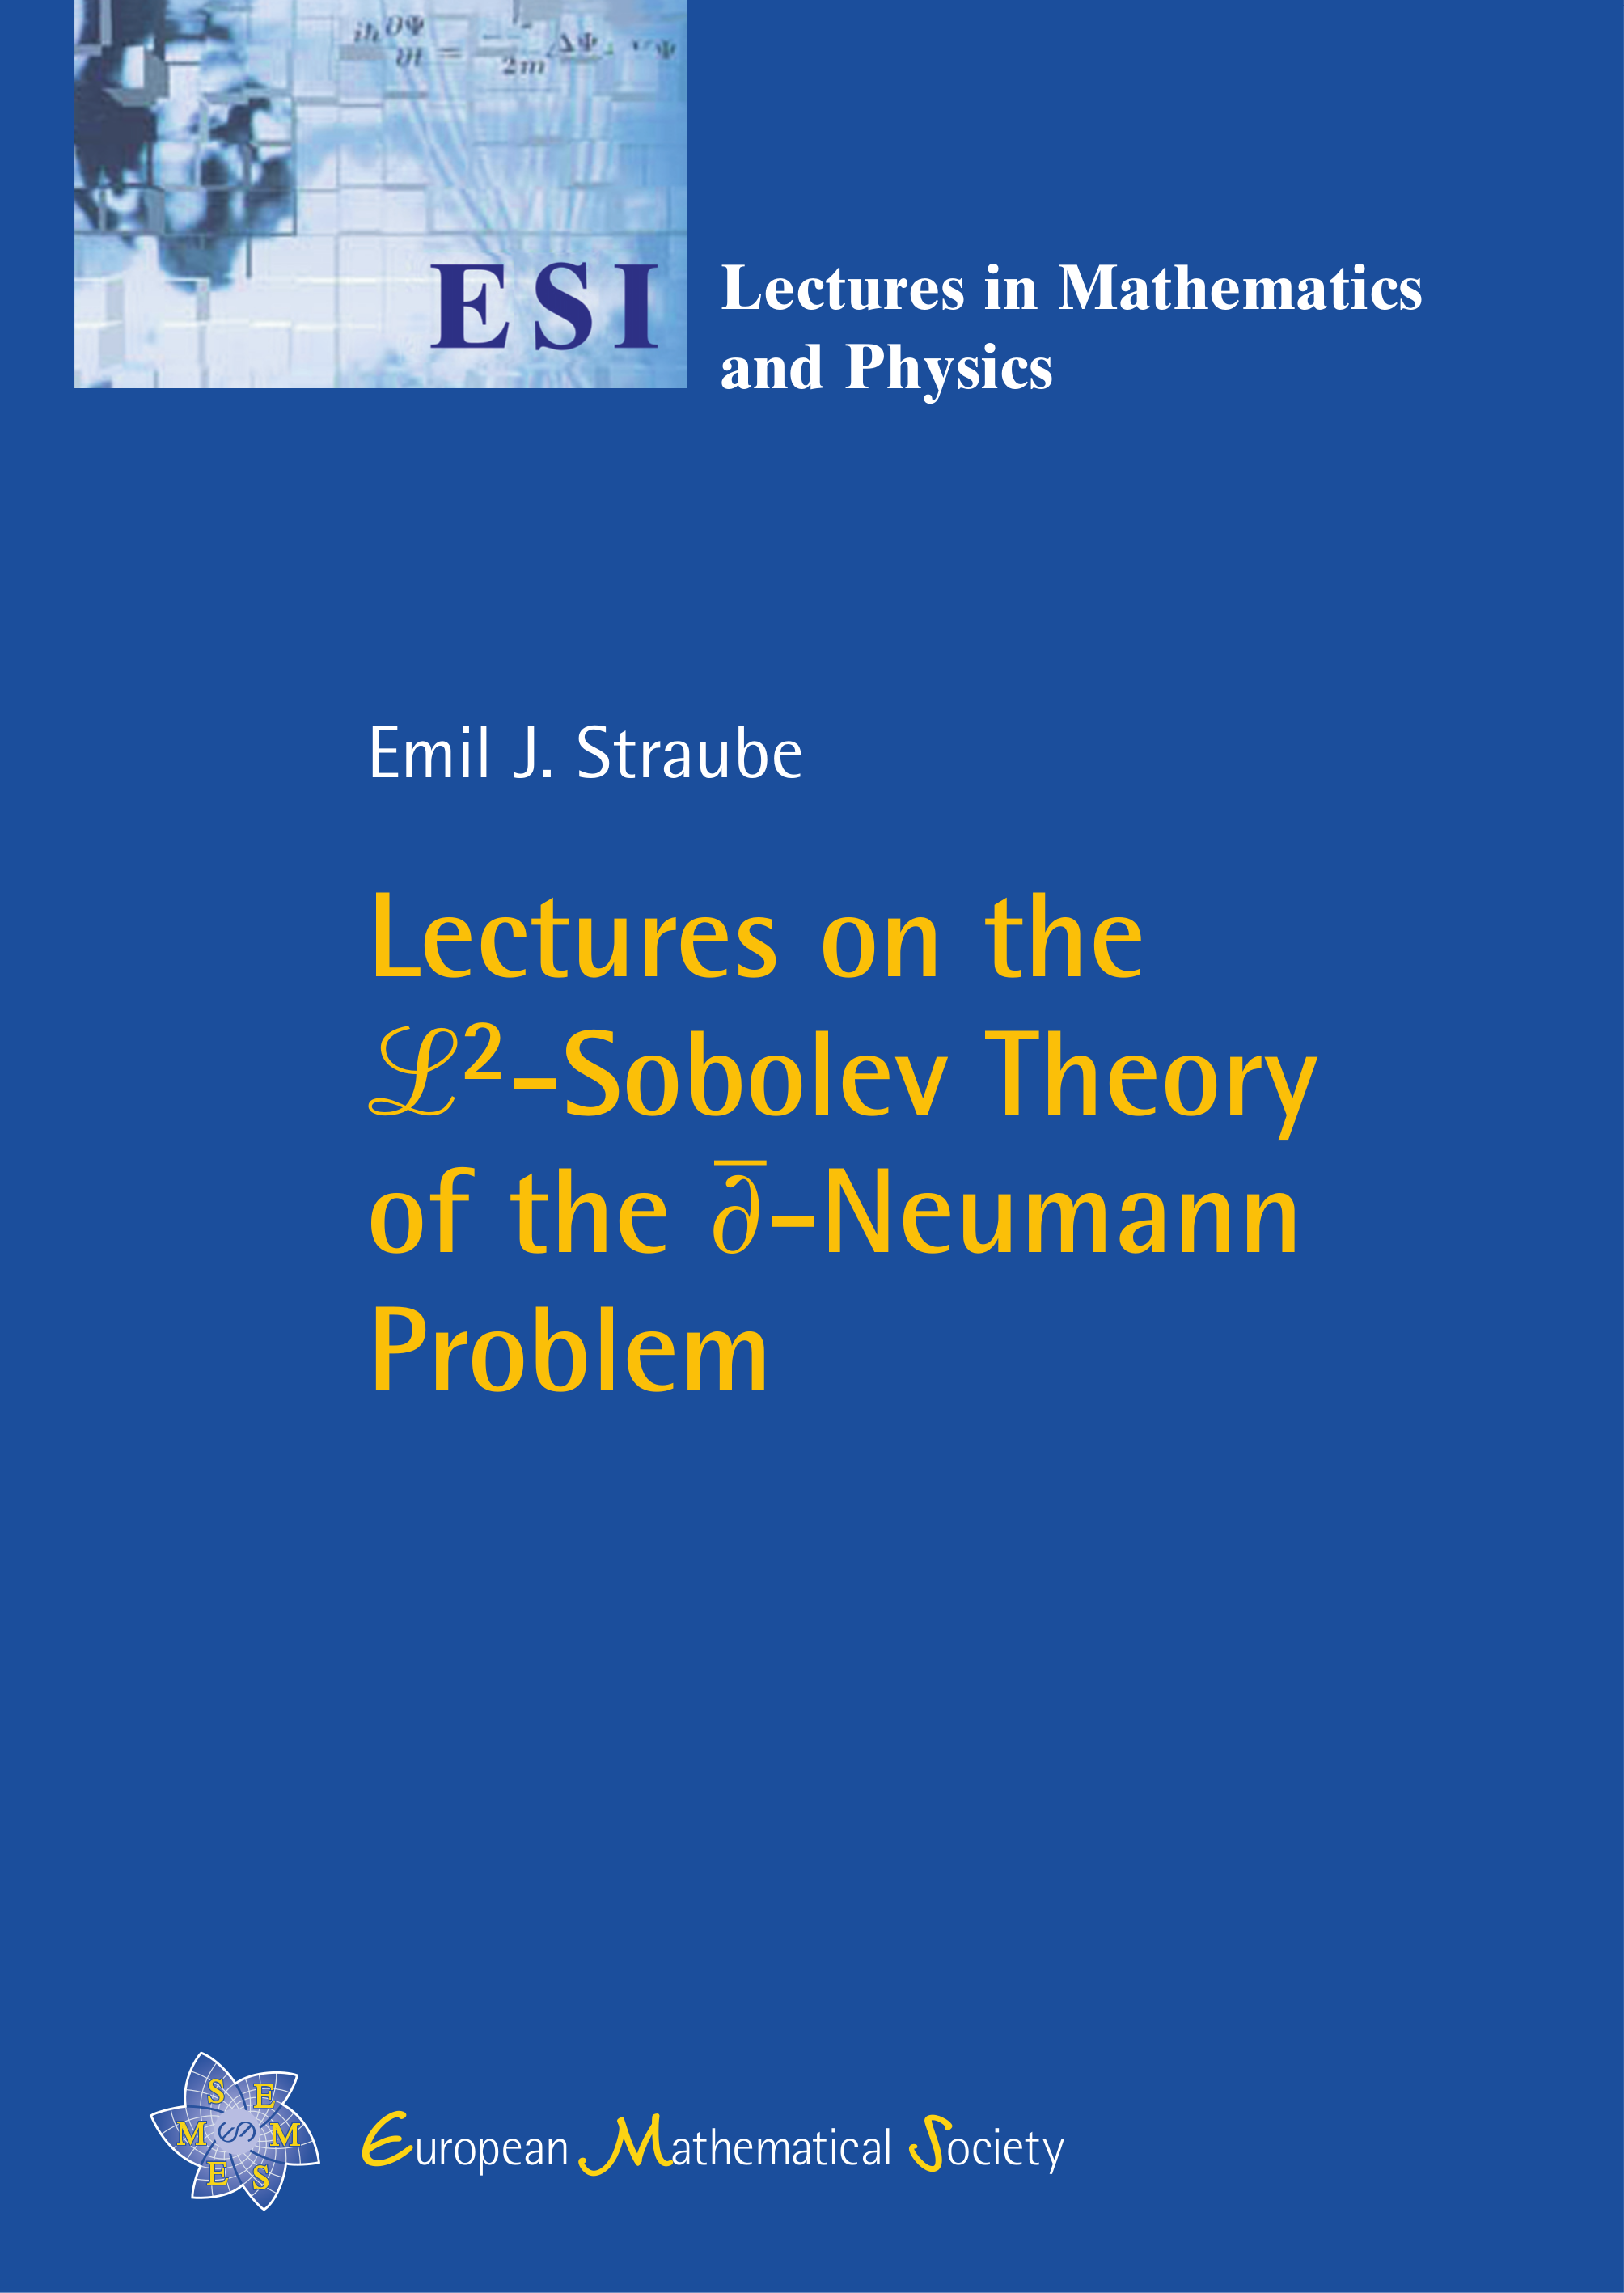 Lectures on the ℒ²-Sobolev Theory of the ∂-Neumann problem cover